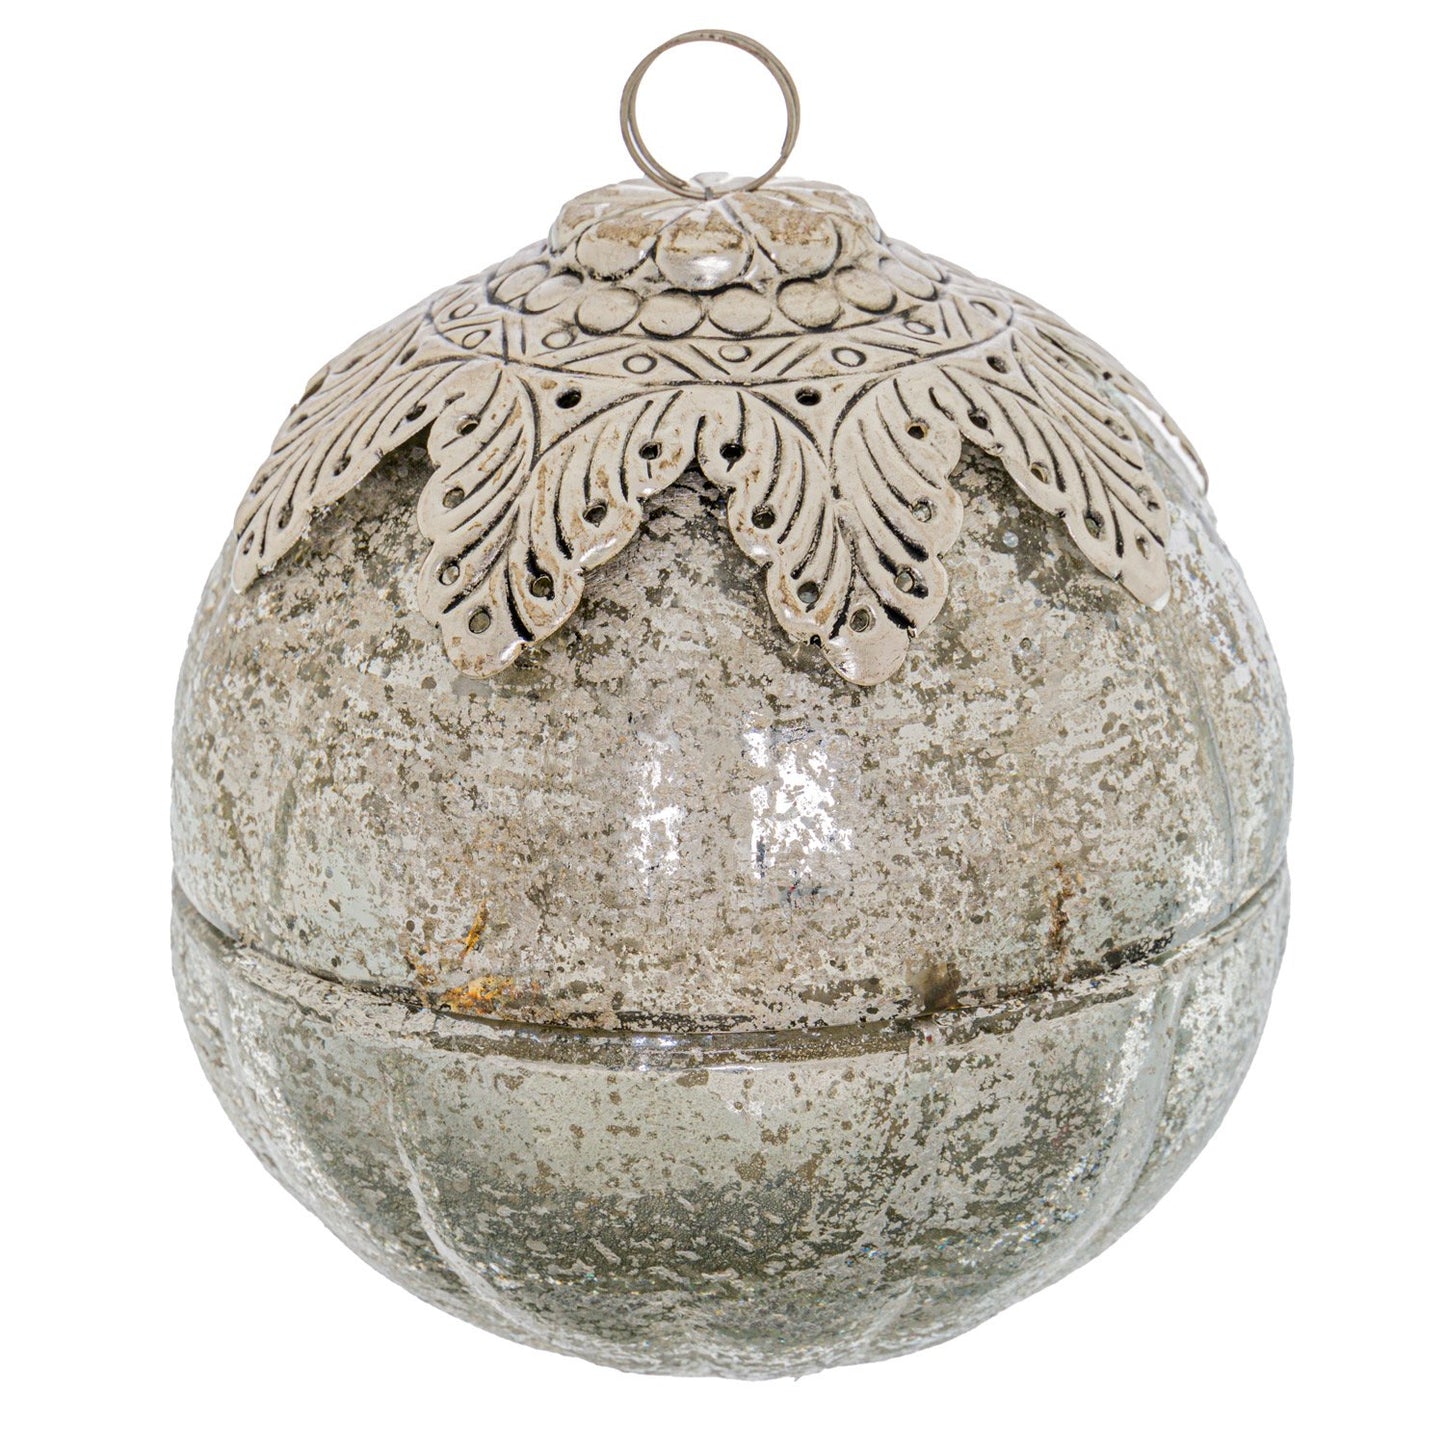 The Noel Collection Mercury Leaf Crested Trinket Bauble